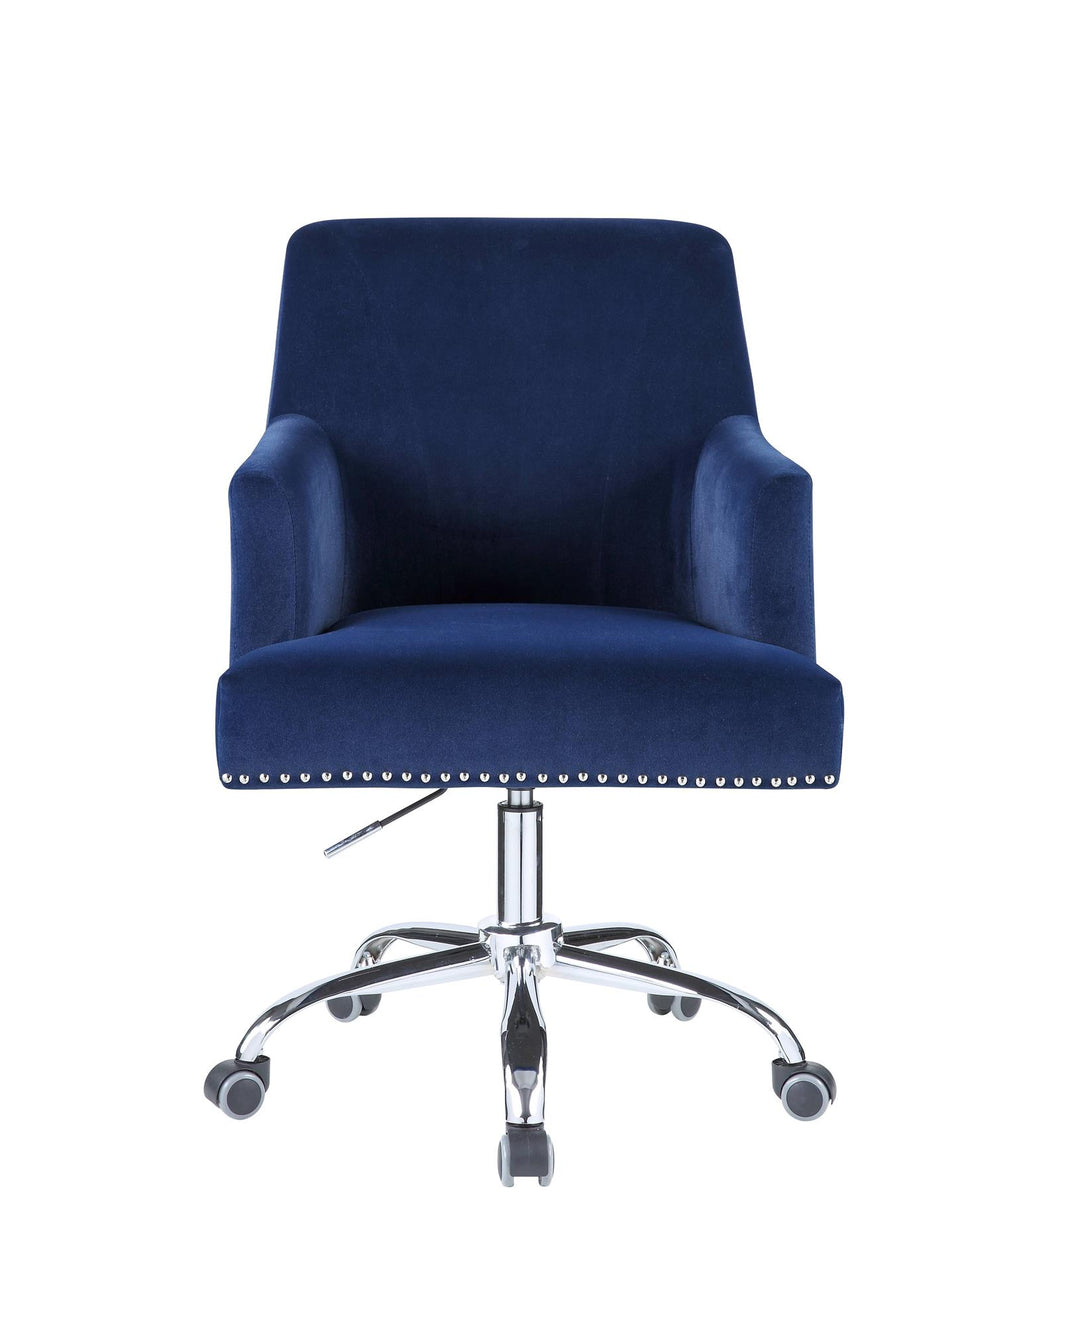 Trenerry Velvet Office Chair with Nailhead Trim - Blue